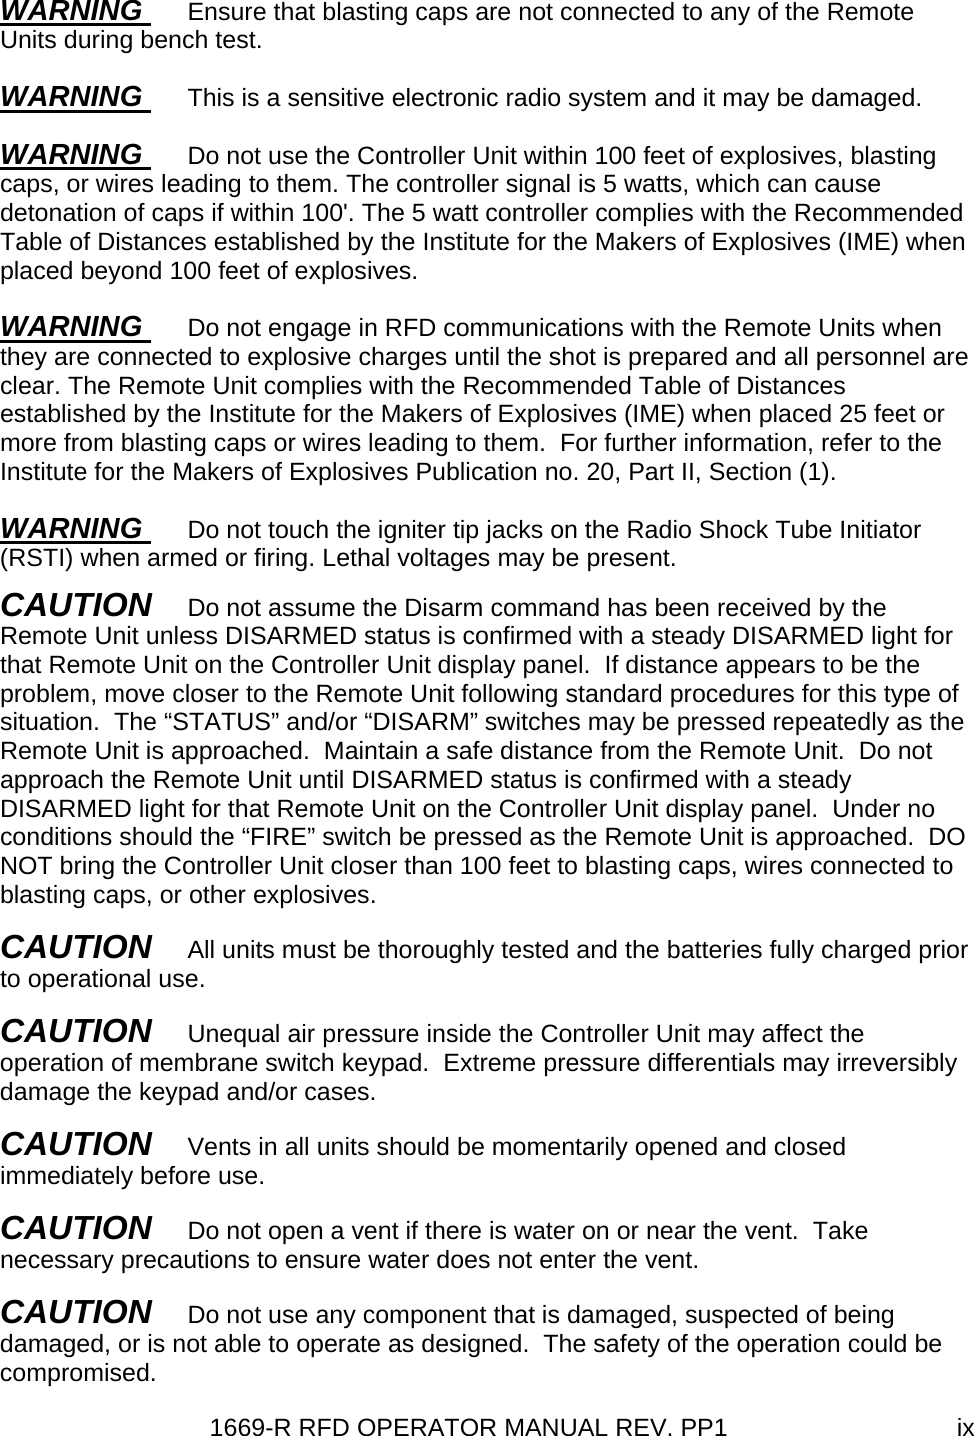 1669-R RFD OPERATOR MANUAL REV. PP1  ixWARNING  Ensure that blasting caps are not connected to any of the Remote Units during bench test. WARNING  This is a sensitive electronic radio system and it may be damaged. WARNING  Do not use the Controller Unit within 100 feet of explosives, blasting caps, or wires leading to them. The controller signal is 5 watts, which can cause detonation of caps if within 100&apos;. The 5 watt controller complies with the Recommended Table of Distances established by the Institute for the Makers of Explosives (IME) when placed beyond 100 feet of explosives. WARNING  Do not engage in RFD communications with the Remote Units when they are connected to explosive charges until the shot is prepared and all personnel are clear. The Remote Unit complies with the Recommended Table of Distances established by the Institute for the Makers of Explosives (IME) when placed 25 feet or more from blasting caps or wires leading to them.  For further information, refer to the Institute for the Makers of Explosives Publication no. 20, Part II, Section (1). WARNING  Do not touch the igniter tip jacks on the Radio Shock Tube Initiator (RSTI) when armed or firing. Lethal voltages may be present. CAUTION   Do not assume the Disarm command has been received by the Remote Unit unless DISARMED status is confirmed with a steady DISARMED light for that Remote Unit on the Controller Unit display panel.  If distance appears to be the problem, move closer to the Remote Unit following standard procedures for this type of situation.  The “STATUS” and/or “DISARM” switches may be pressed repeatedly as the Remote Unit is approached.  Maintain a safe distance from the Remote Unit.  Do not approach the Remote Unit until DISARMED status is confirmed with a steady DISARMED light for that Remote Unit on the Controller Unit display panel.  Under no conditions should the “FIRE” switch be pressed as the Remote Unit is approached.  DO NOT bring the Controller Unit closer than 100 feet to blasting caps, wires connected to blasting caps, or other explosives. CAUTION   All units must be thoroughly tested and the batteries fully charged prior to operational use. CAUTION   Unequal air pressure inside the Controller Unit may affect the operation of membrane switch keypad.  Extreme pressure differentials may irreversibly damage the keypad and/or cases.   CAUTION   Vents in all units should be momentarily opened and closed immediately before use. CAUTION   Do not open a vent if there is water on or near the vent.  Take necessary precautions to ensure water does not enter the vent. CAUTION   Do not use any component that is damaged, suspected of being damaged, or is not able to operate as designed.  The safety of the operation could be compromised.